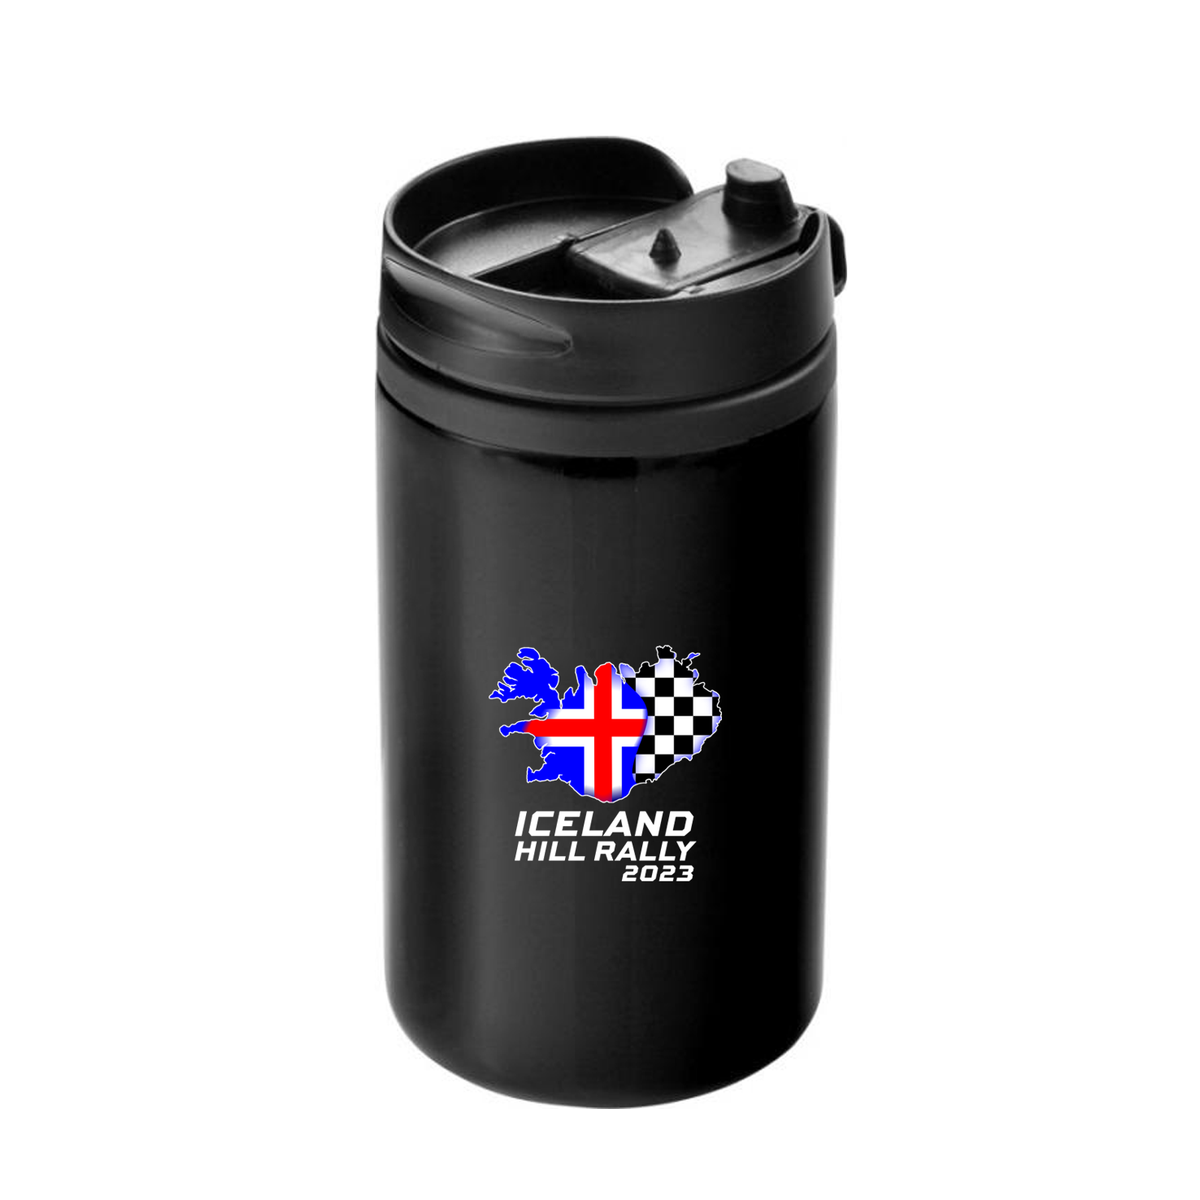 Iceland Hill Rally - Insulated tumbler Black